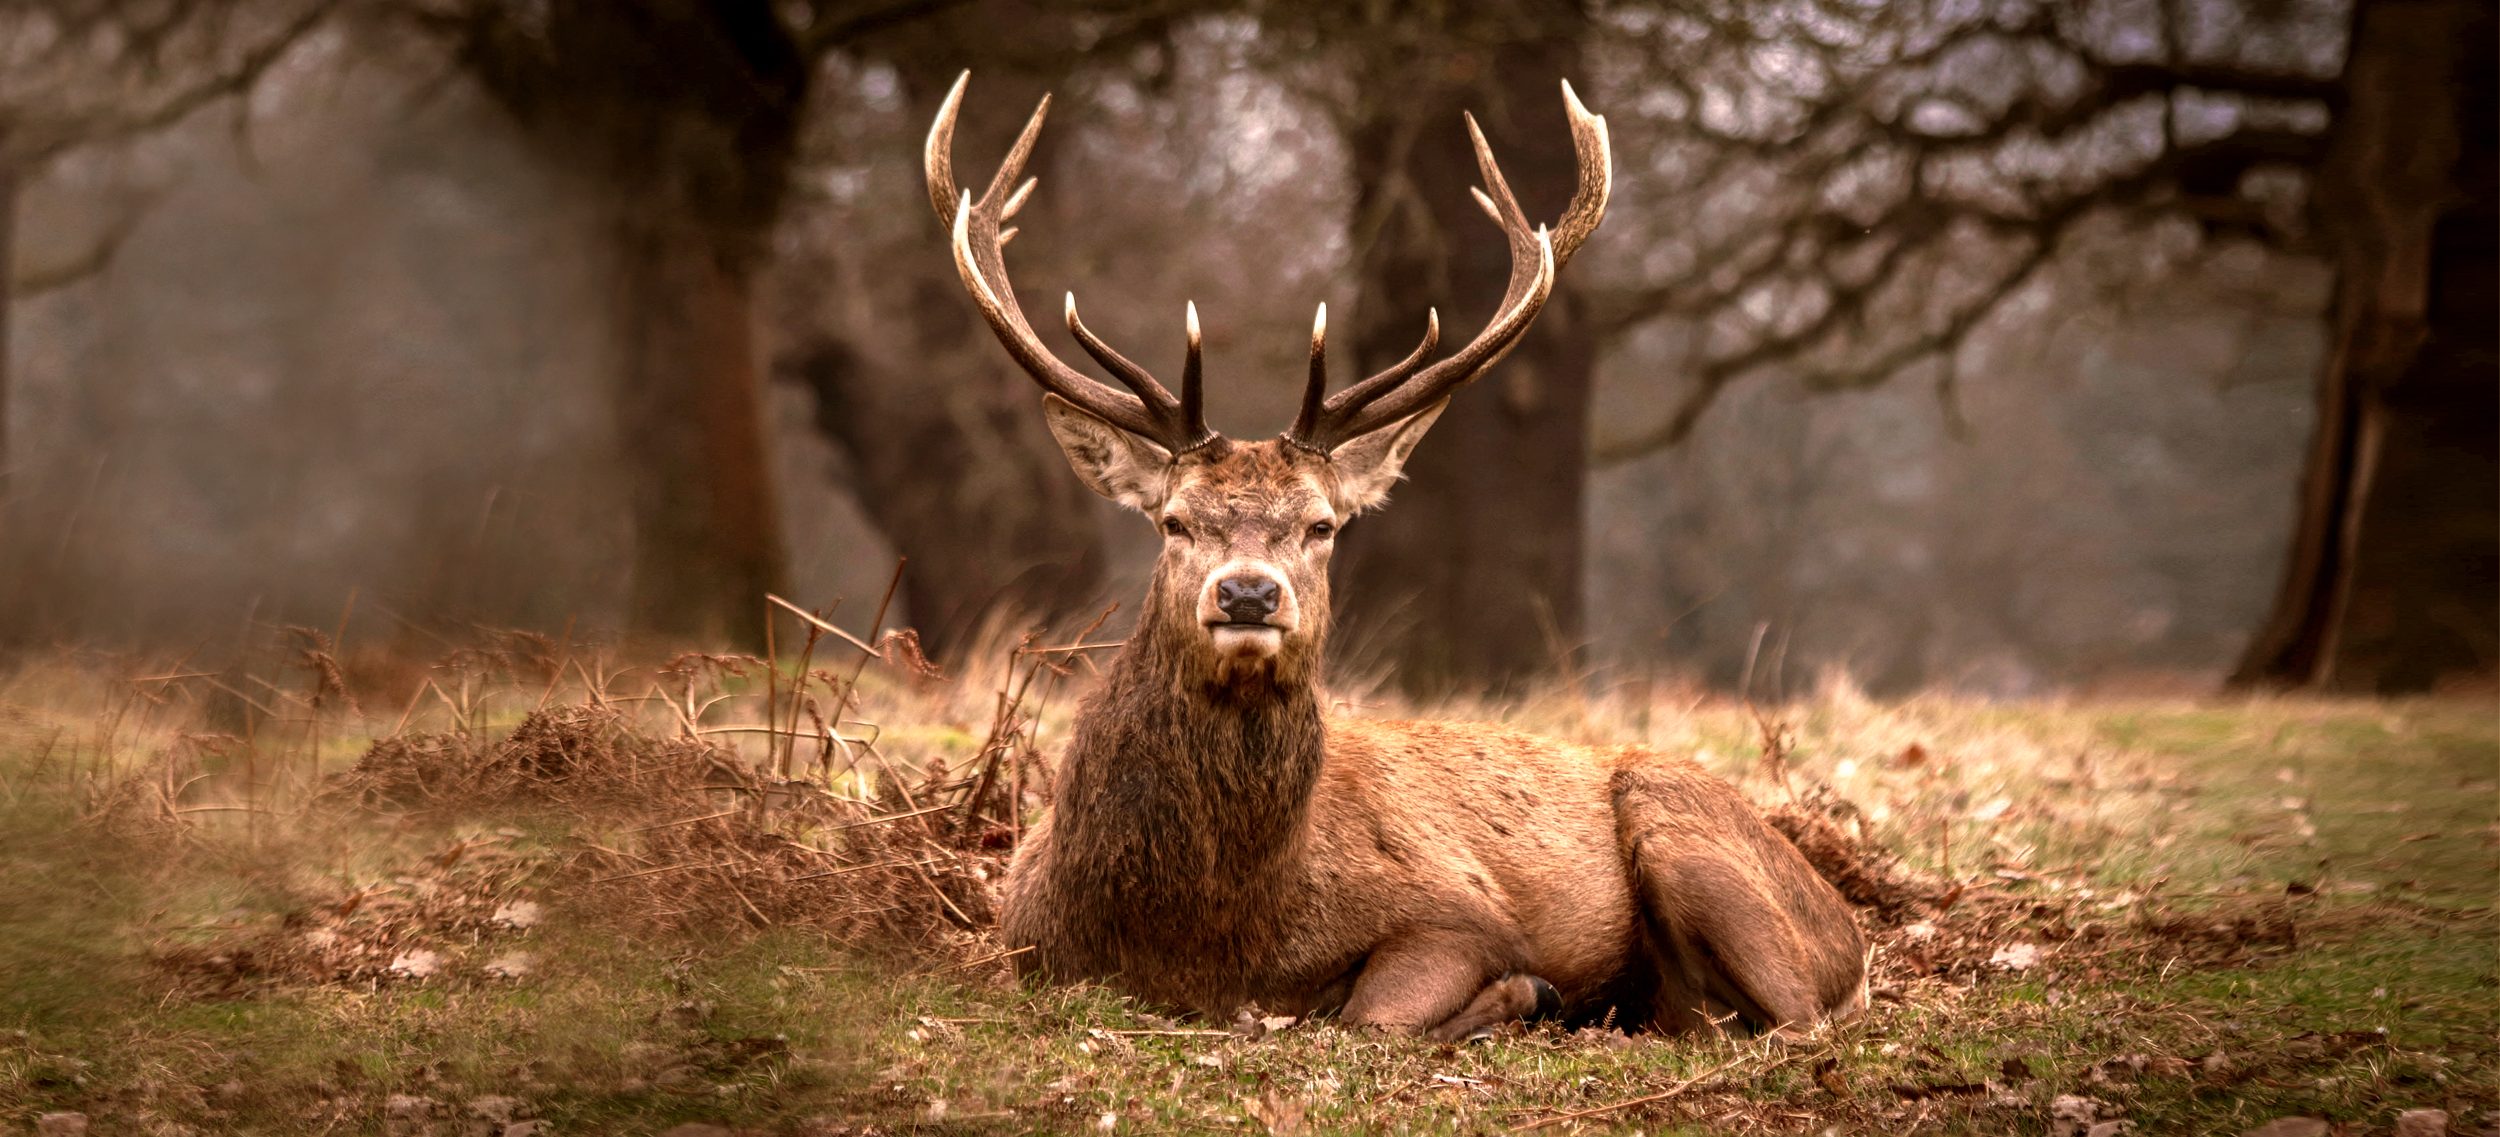 The king of the forest red deer